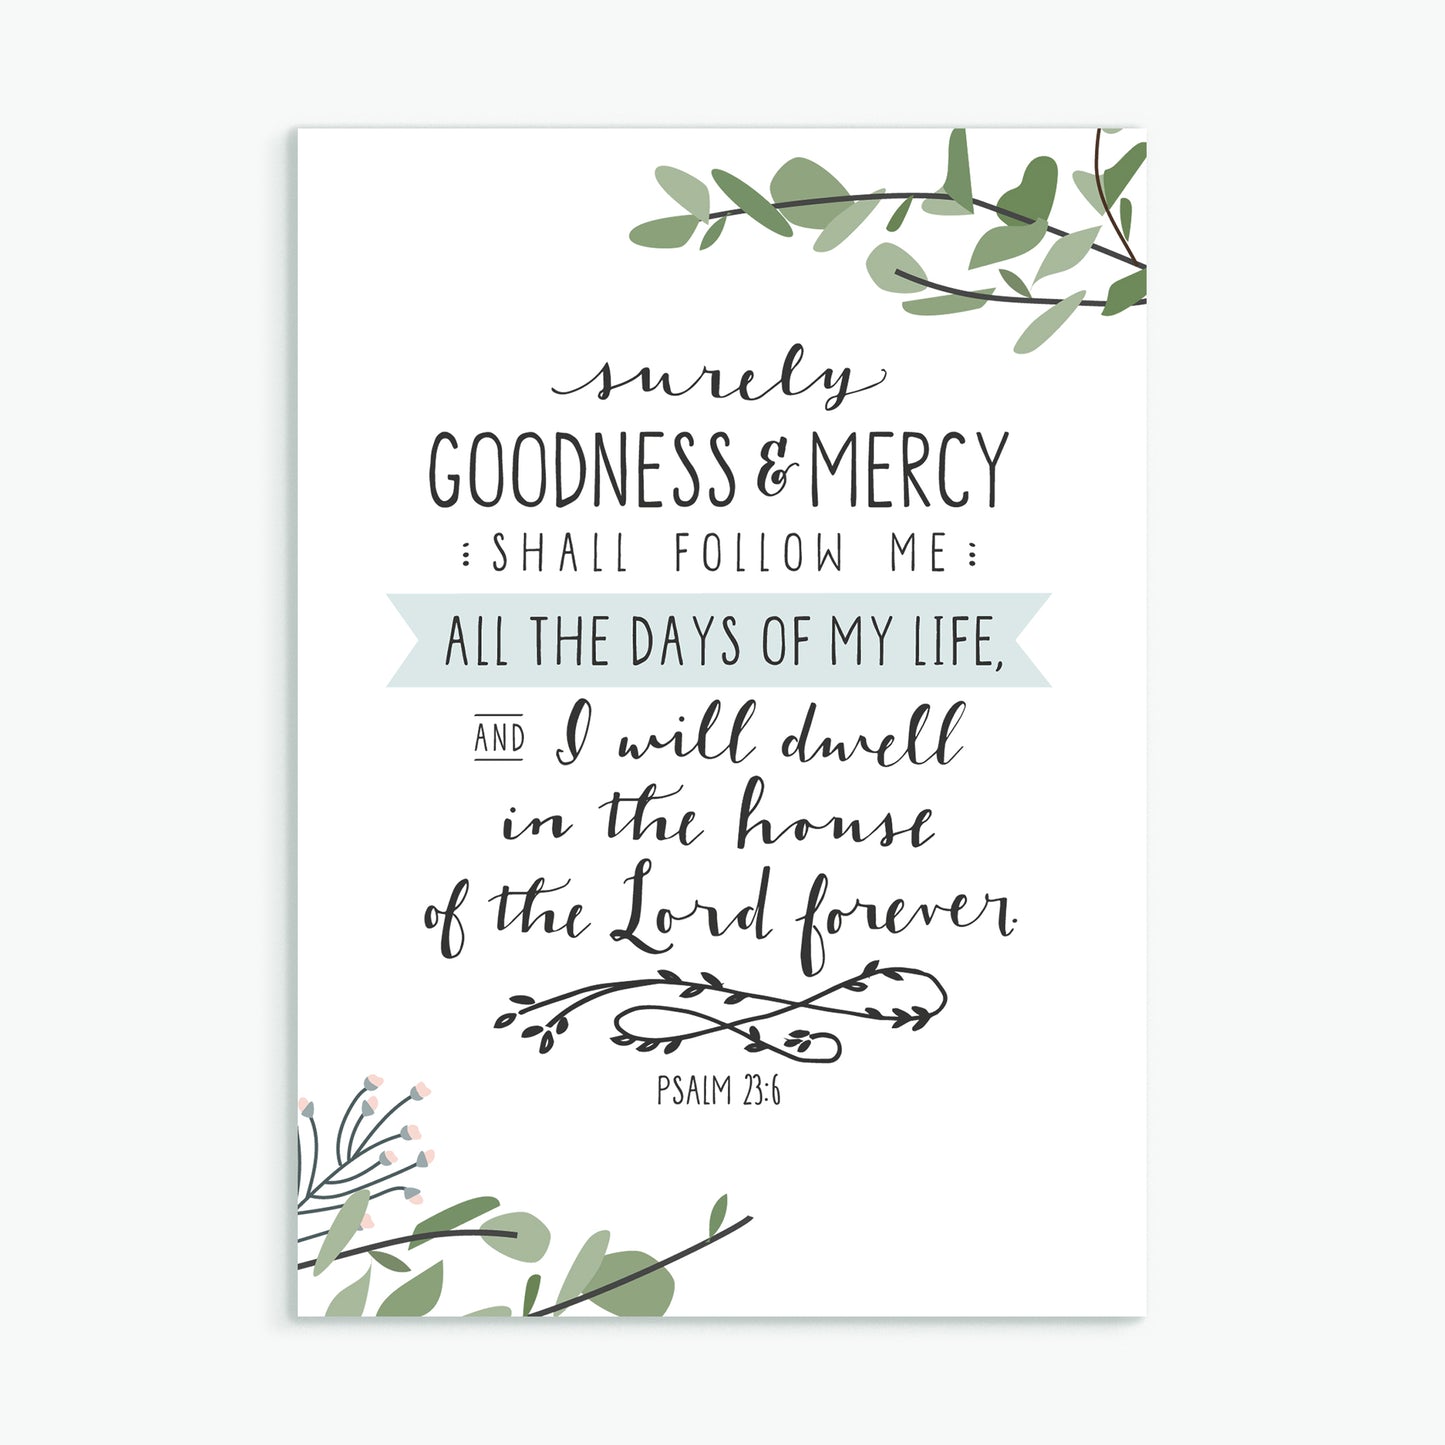 'Surely Goodness and Mercy' by Emily Burger - Greeting Card